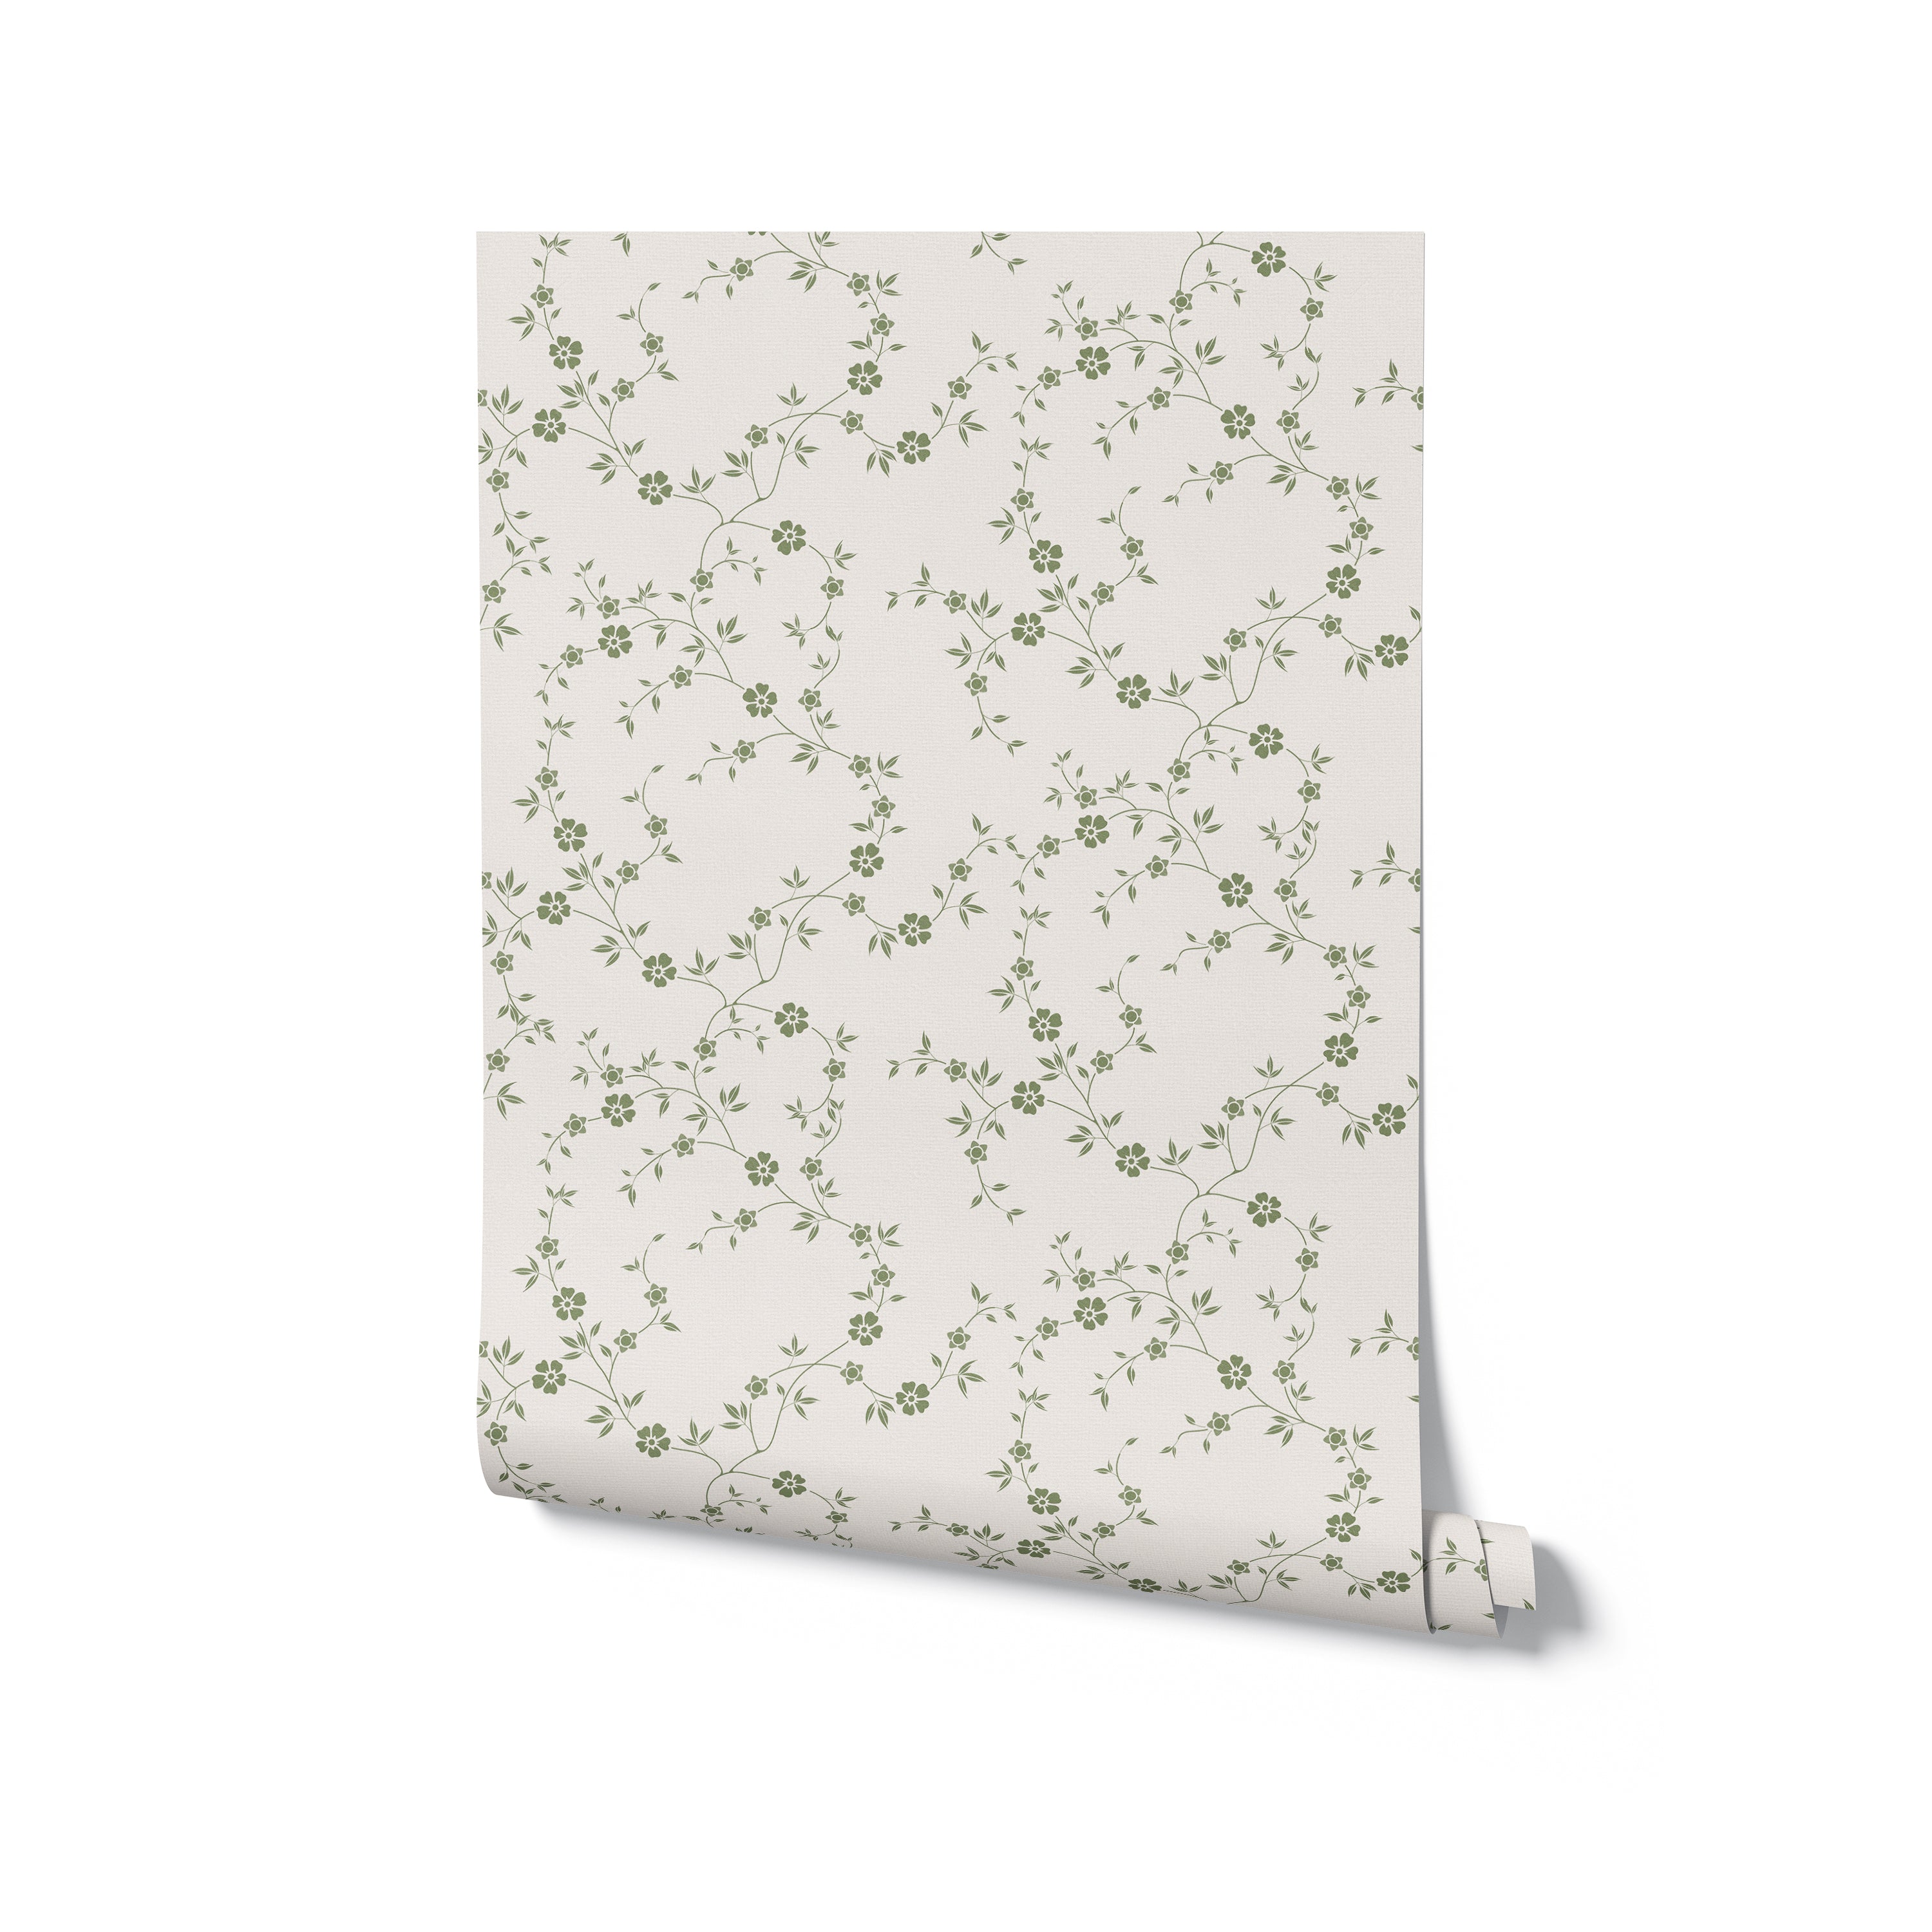 A rolled piece of the Charming Floral Wallpaper-Moss against a white backdrop, highlighting the intricate green floral pattern that exudes a sense of vintage elegance, ready to transform a room with its natural and charming design.